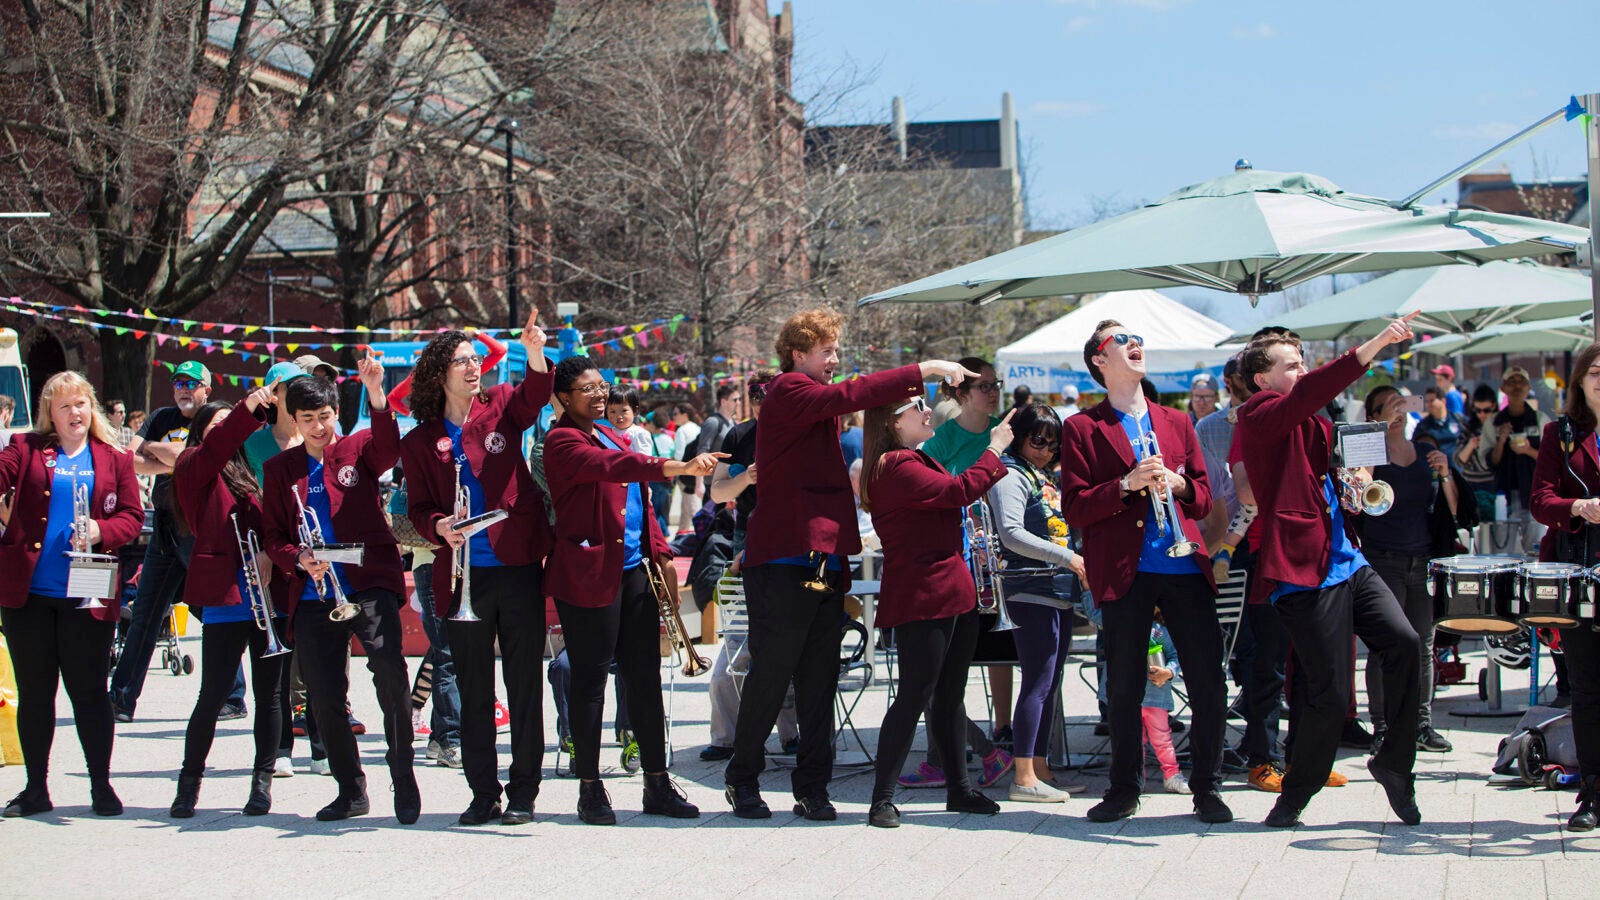 The Harvard University Band gathers on the Science Center Plaza for the opening concert.